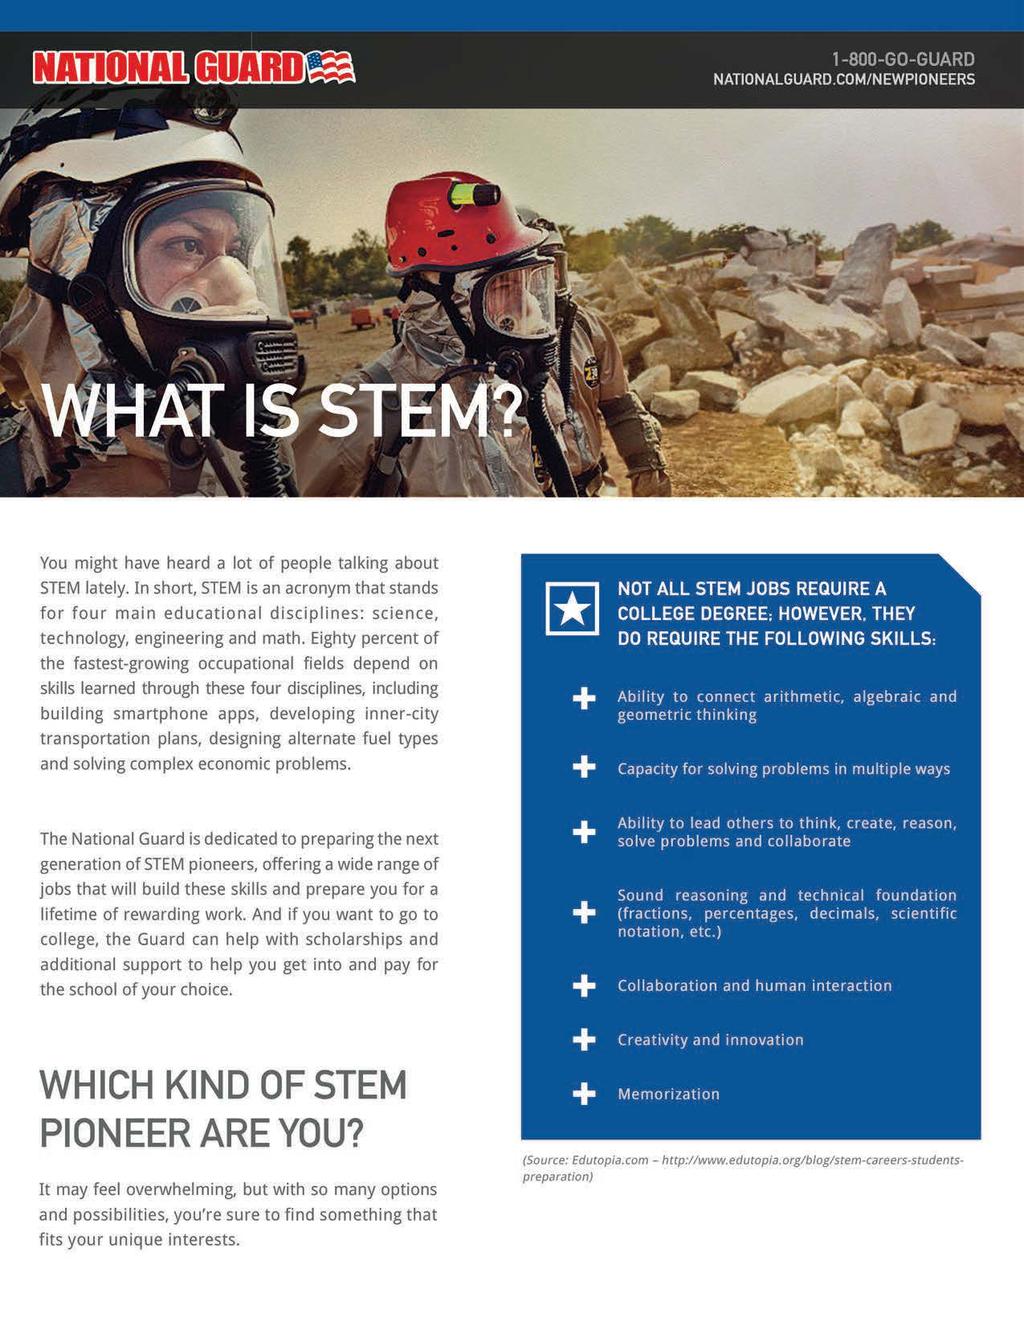 You might have heard a lot of people talking about STEM lately. In short, STEM is an acronym that stands for four main educational disciplines: science, technology, engineering and math.